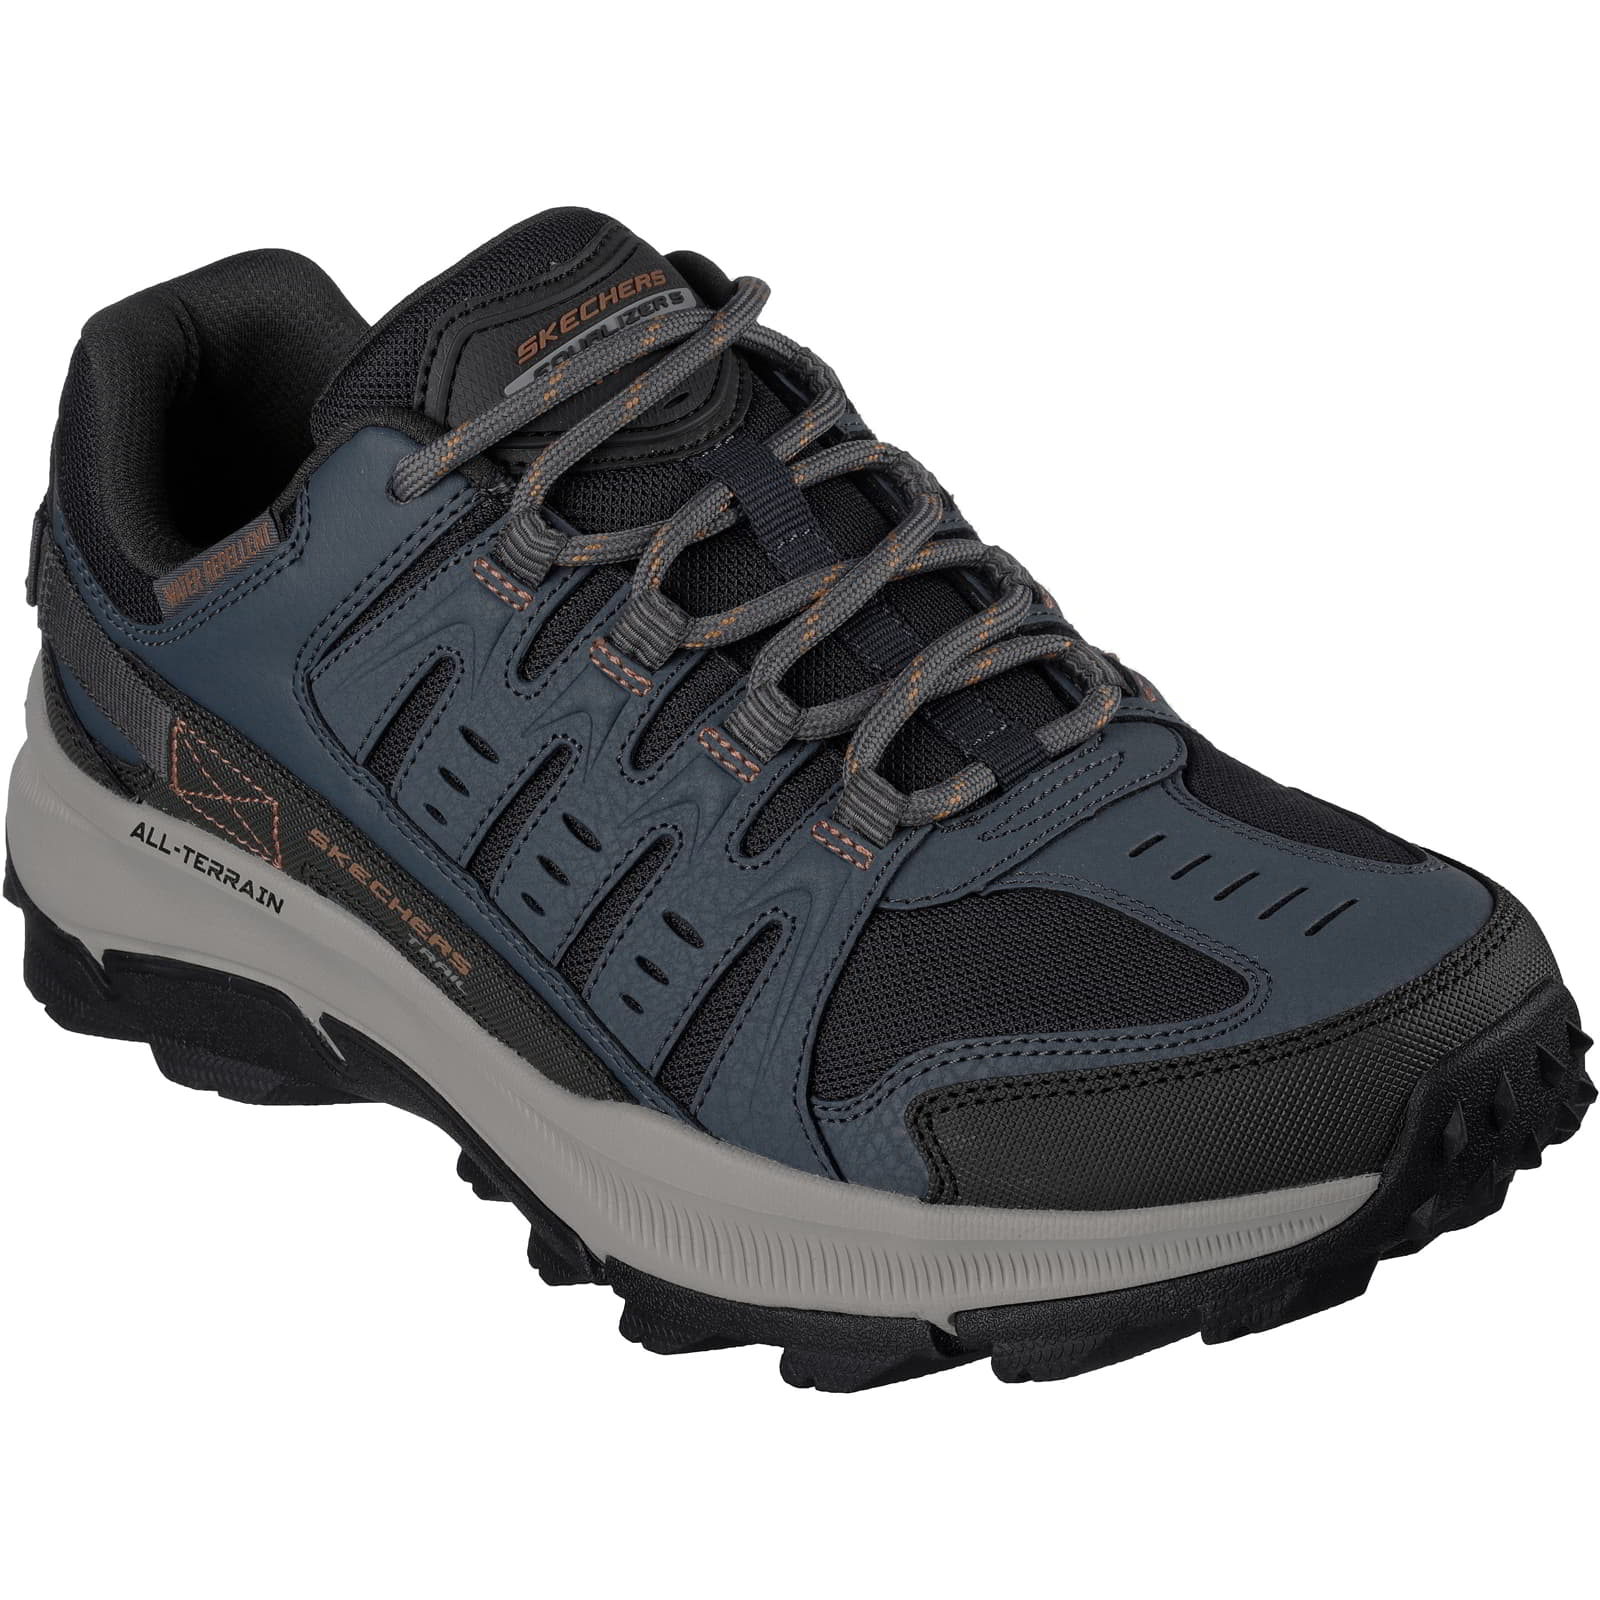 Skechers Men's Equalizer 5.0 Trail Water Repellent Walking Shoes Trainers - UK 10.5